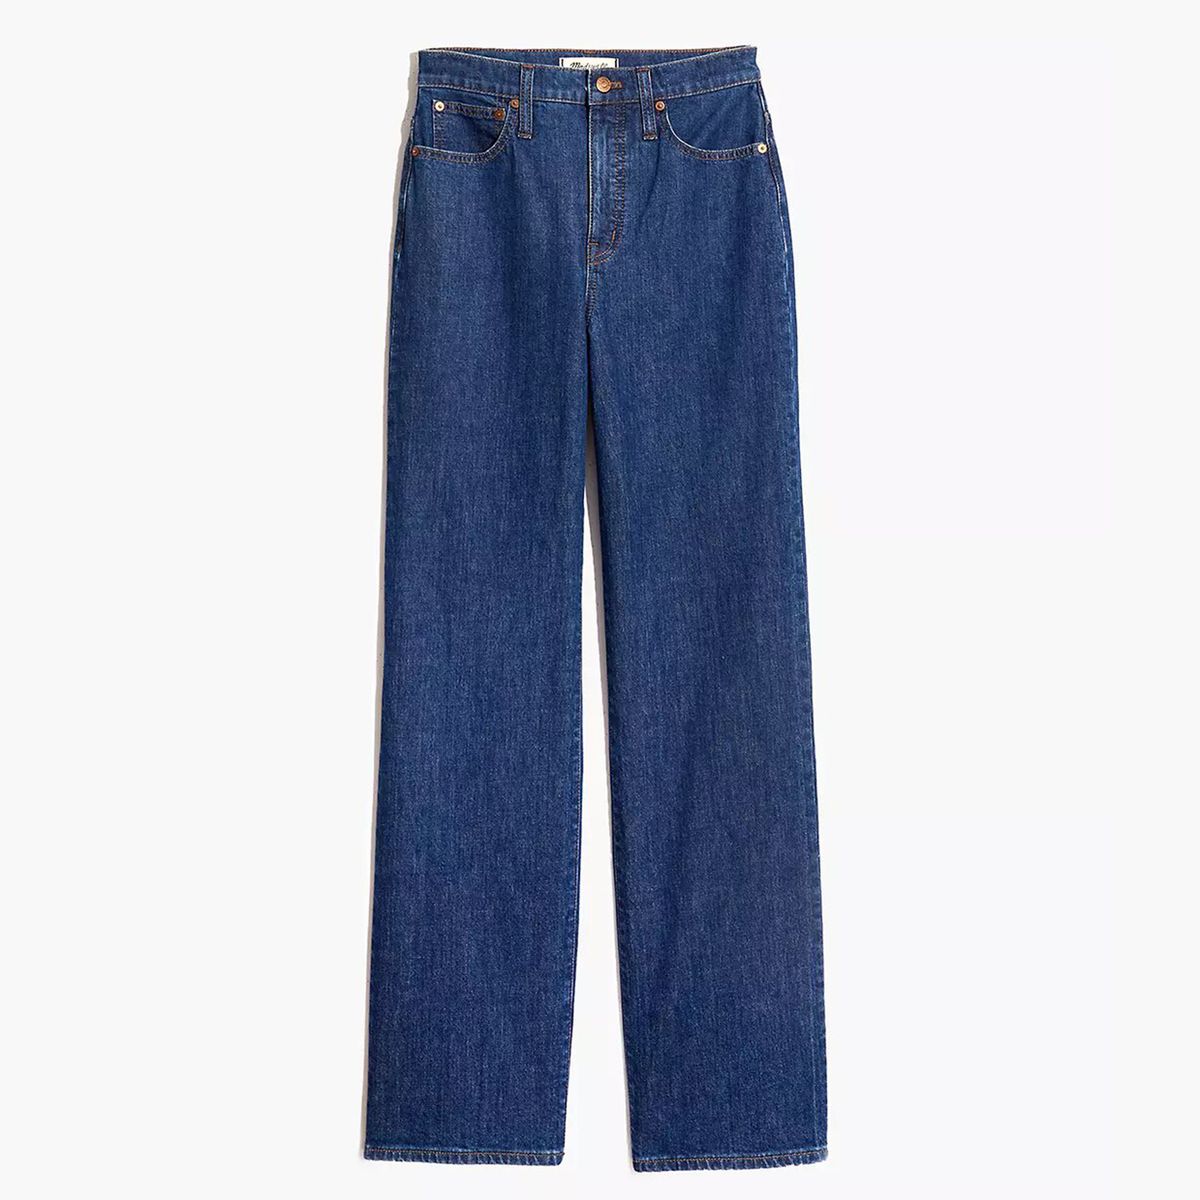 Madewell's $75 Jeans Sale: Flattering Denim Perfect for Fall | InStyle